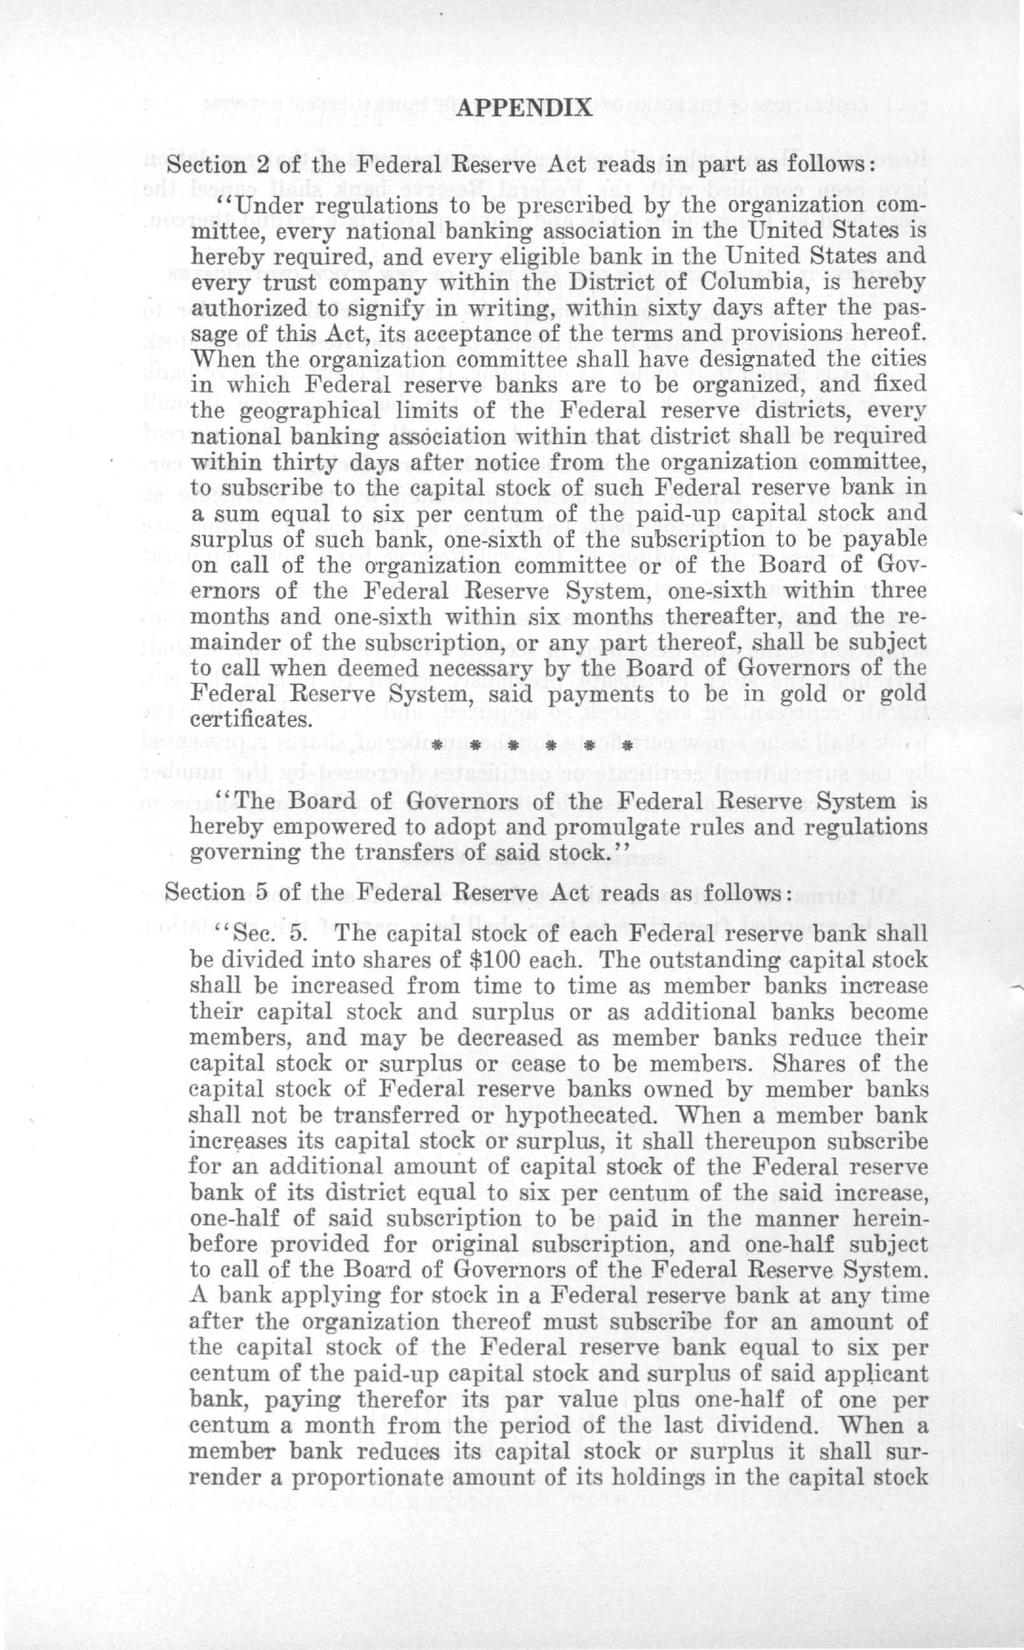 APPENDIX Section 2 of the Federal Eeserve Act reads in part as follows: "Under regulations to be prescribed by the organization committee, every national banking association in the United States is